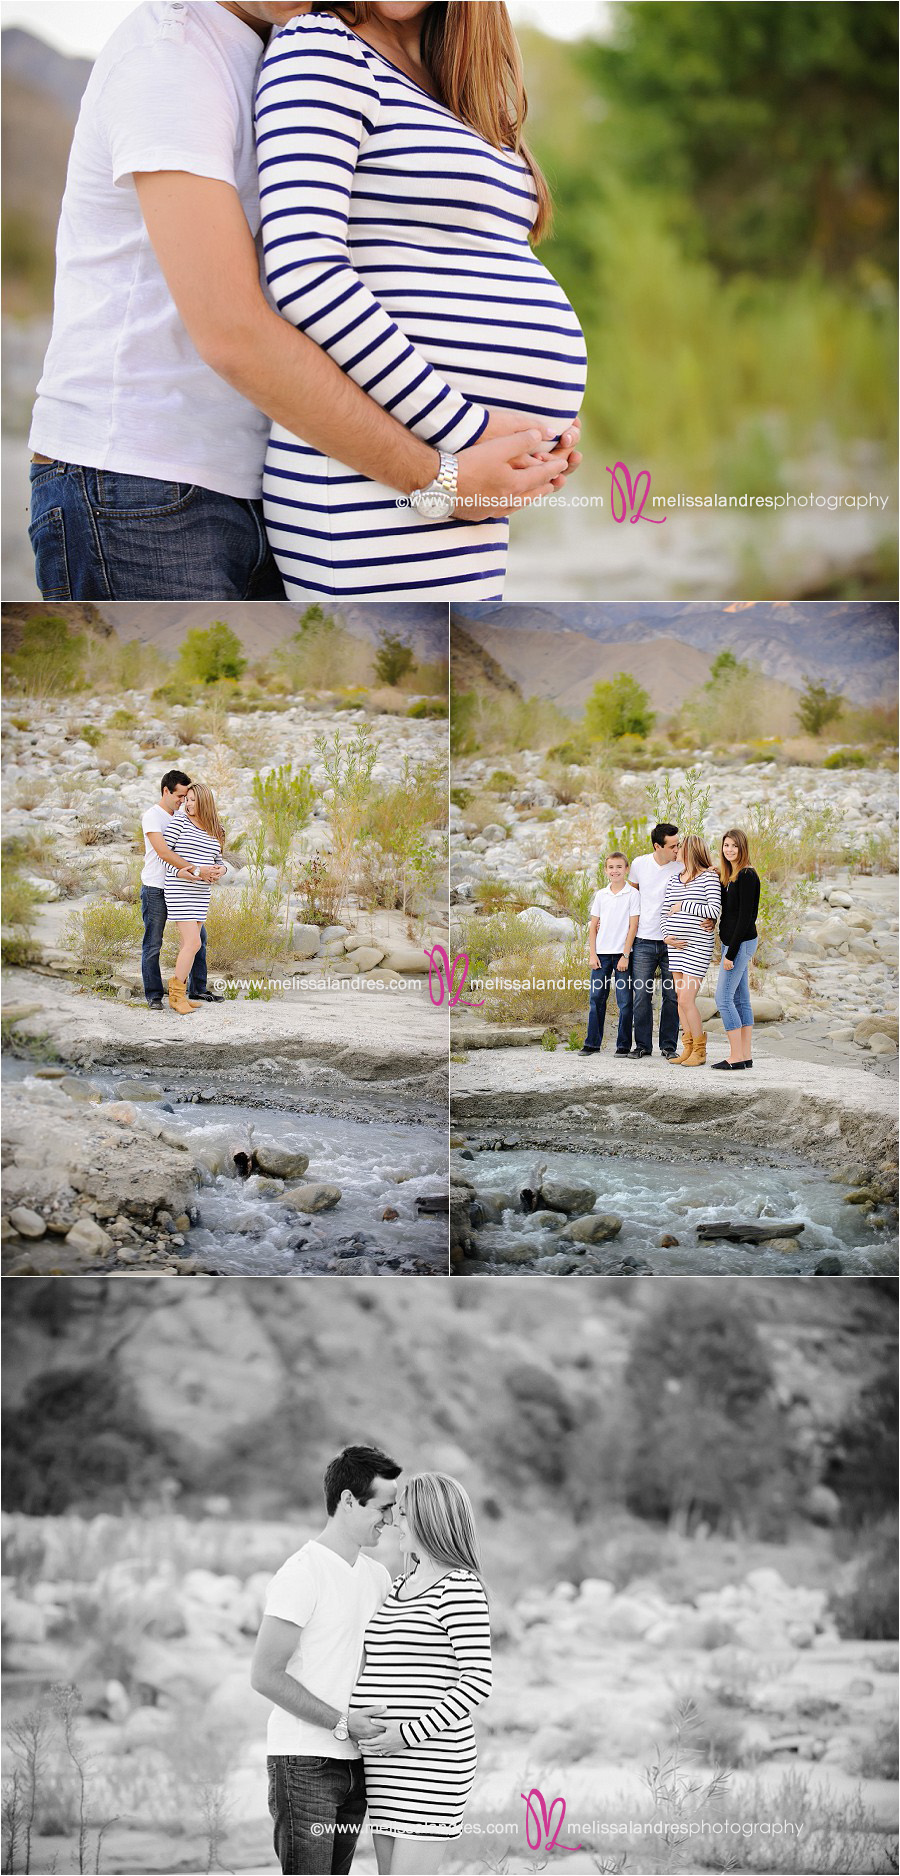 the best maternity and pregnancy photos, outdoor maternity photo shoot by Palm Springs photographer Melissa Landres photography